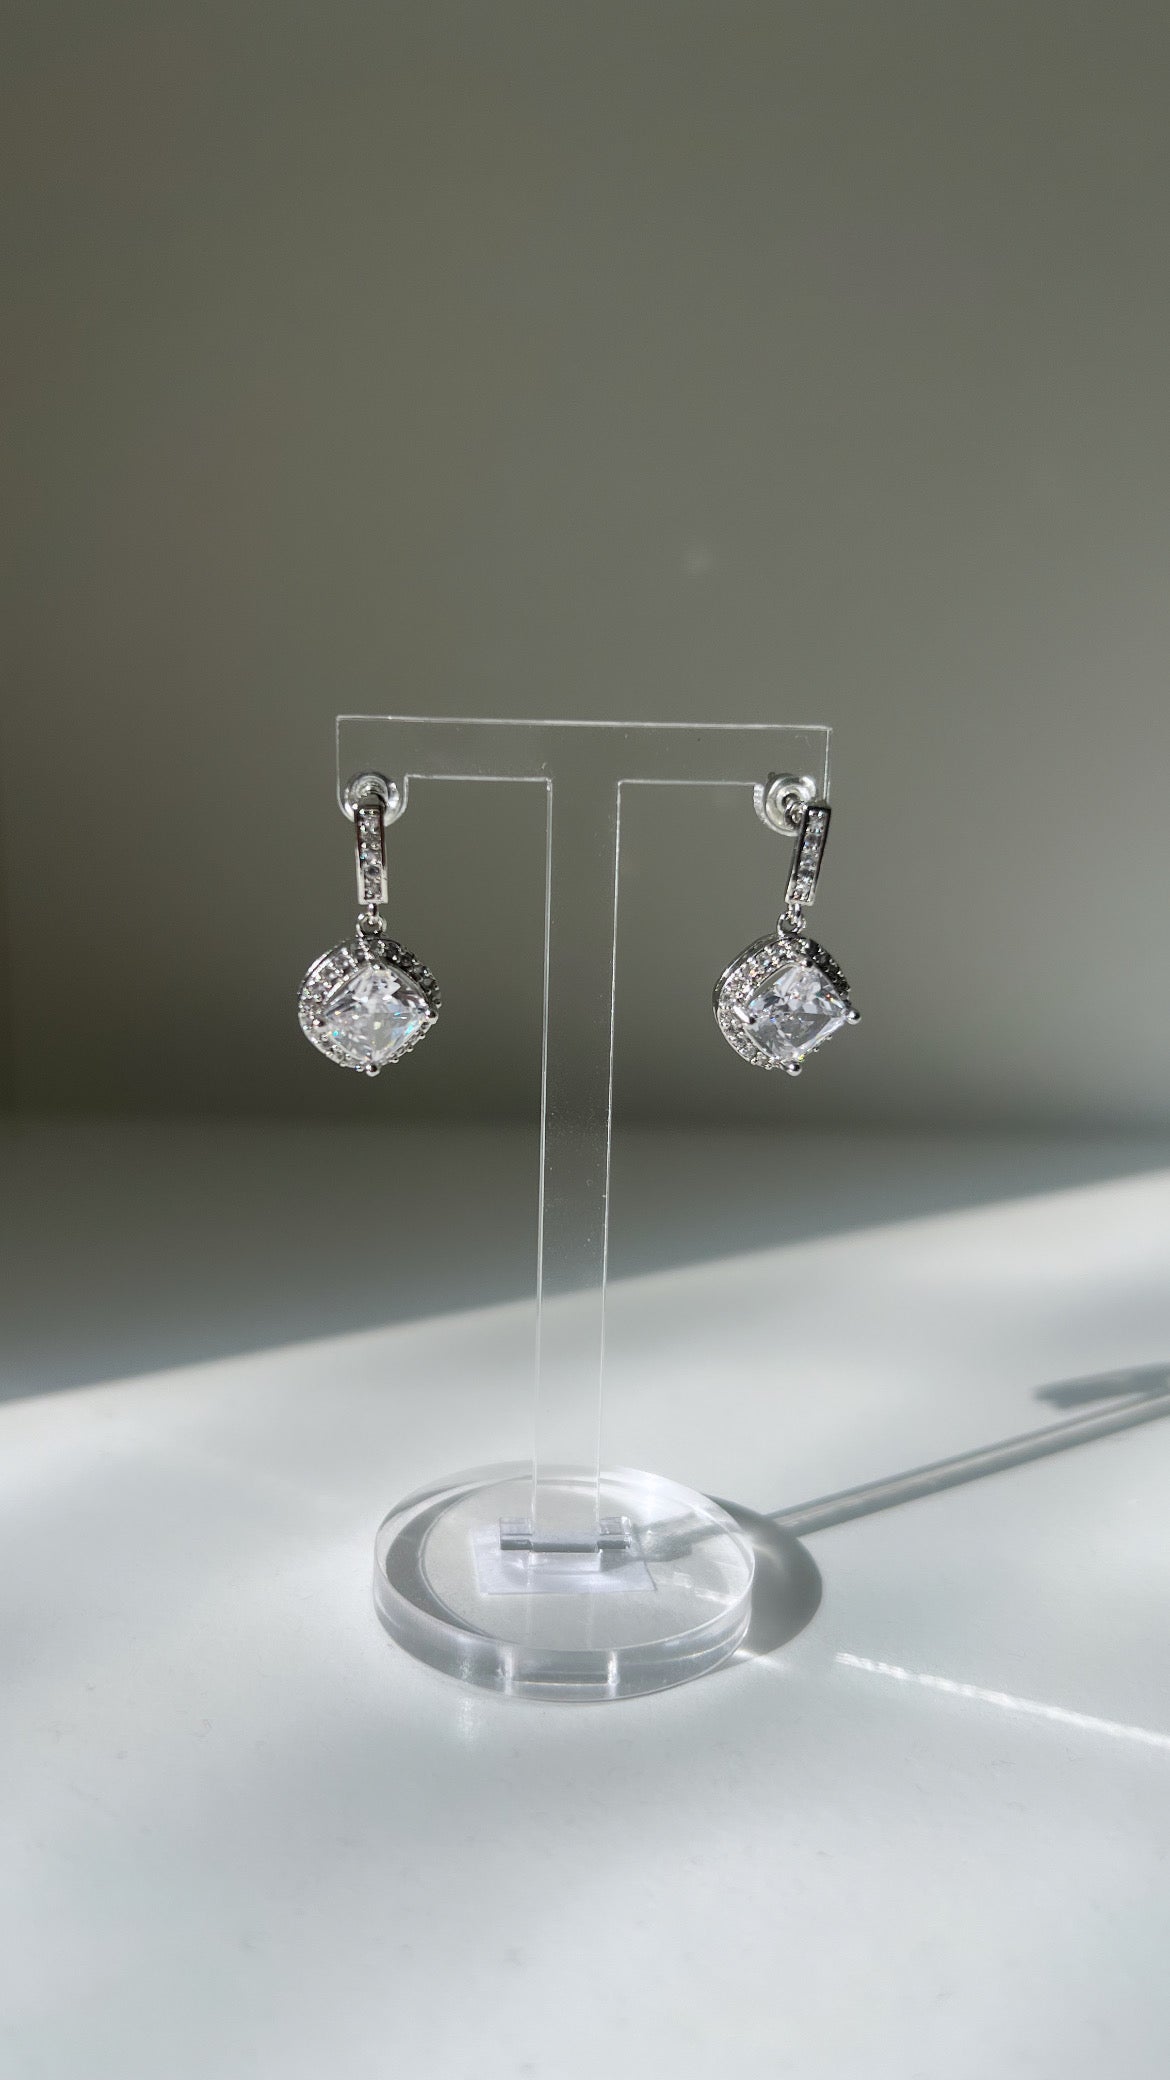 A pair of Daphne earrings with diamond accents